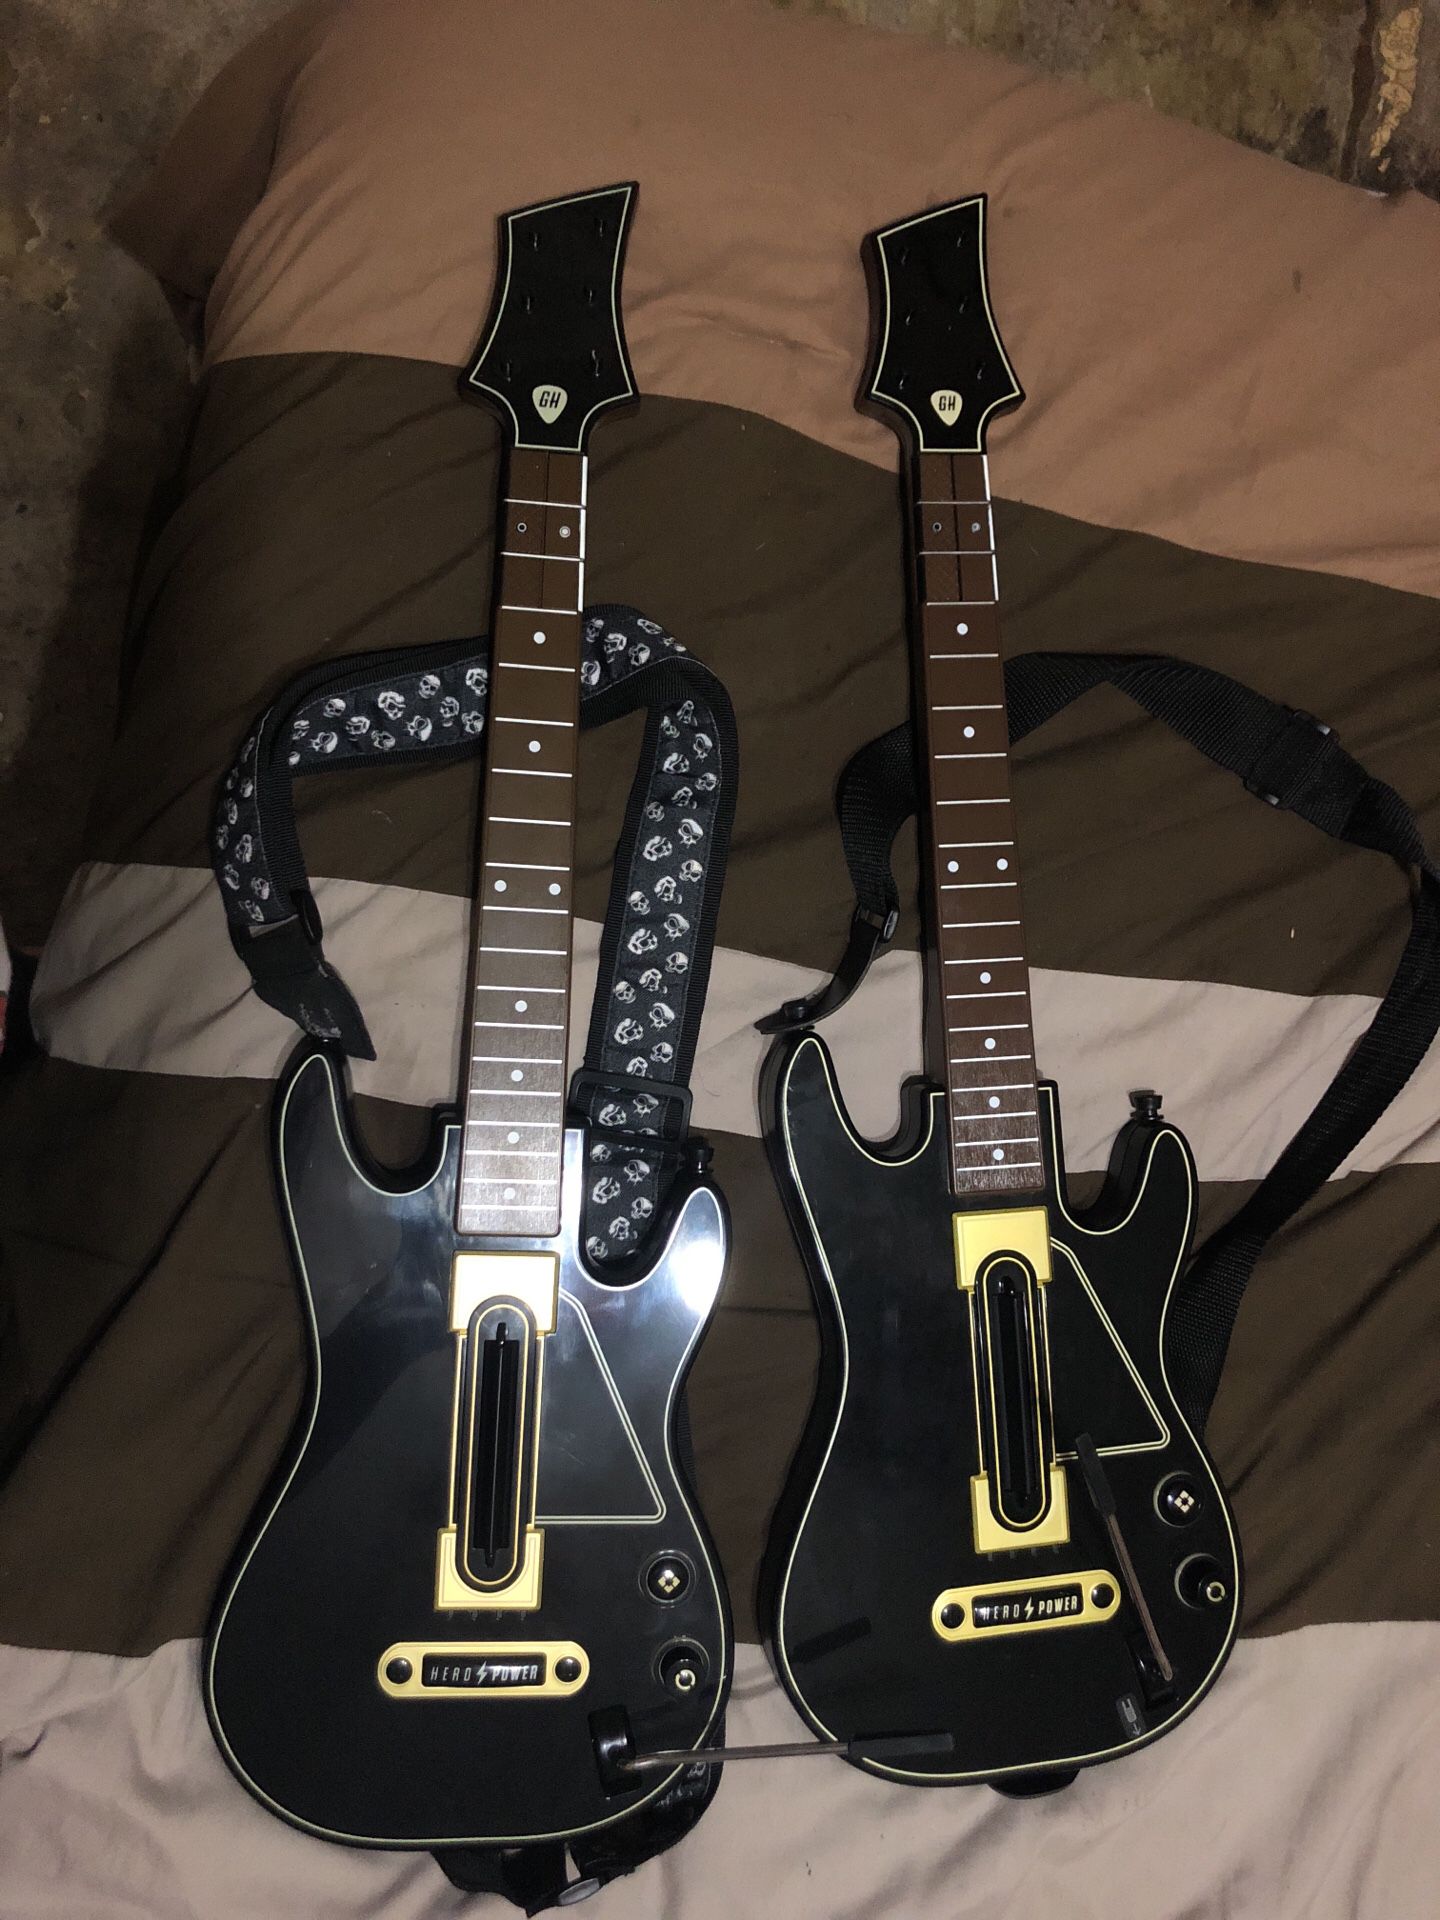 Brand new ps4 guitars for the game guitar hero live